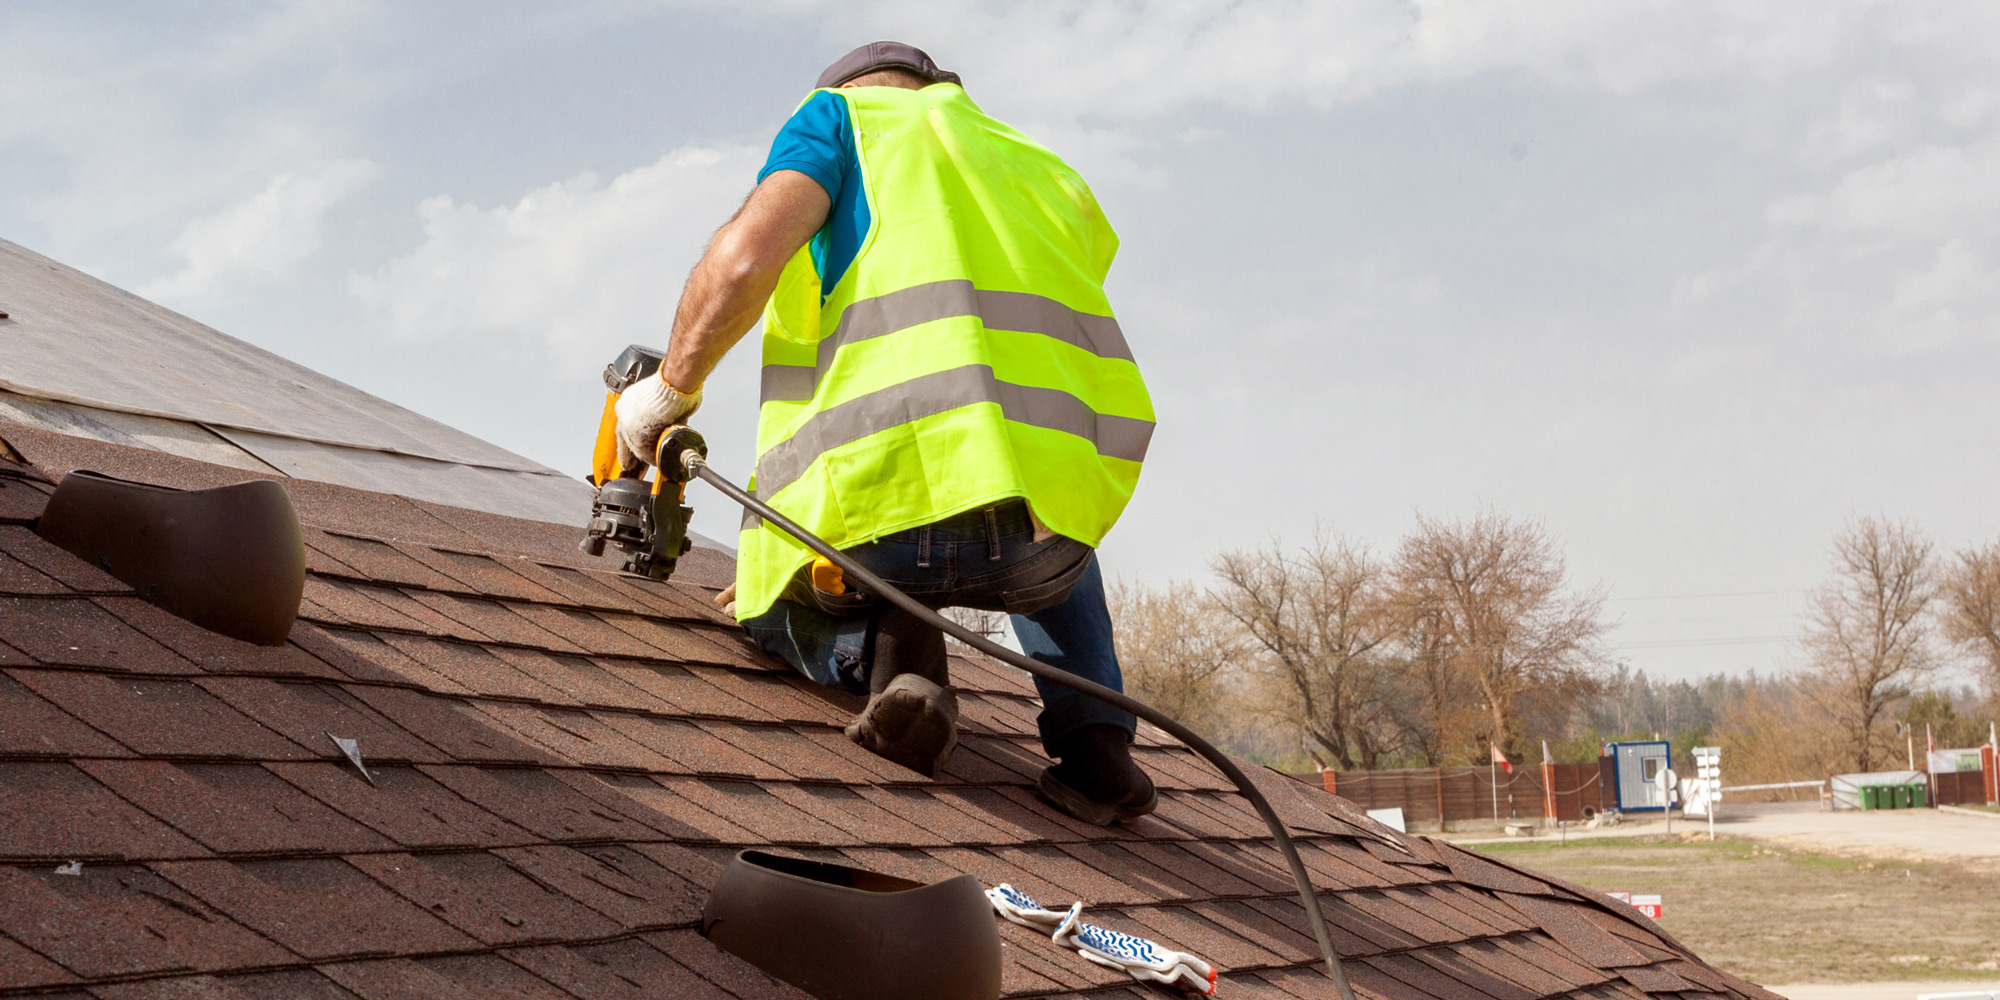 How to Find Fantastic Employees for Your Roofing Business